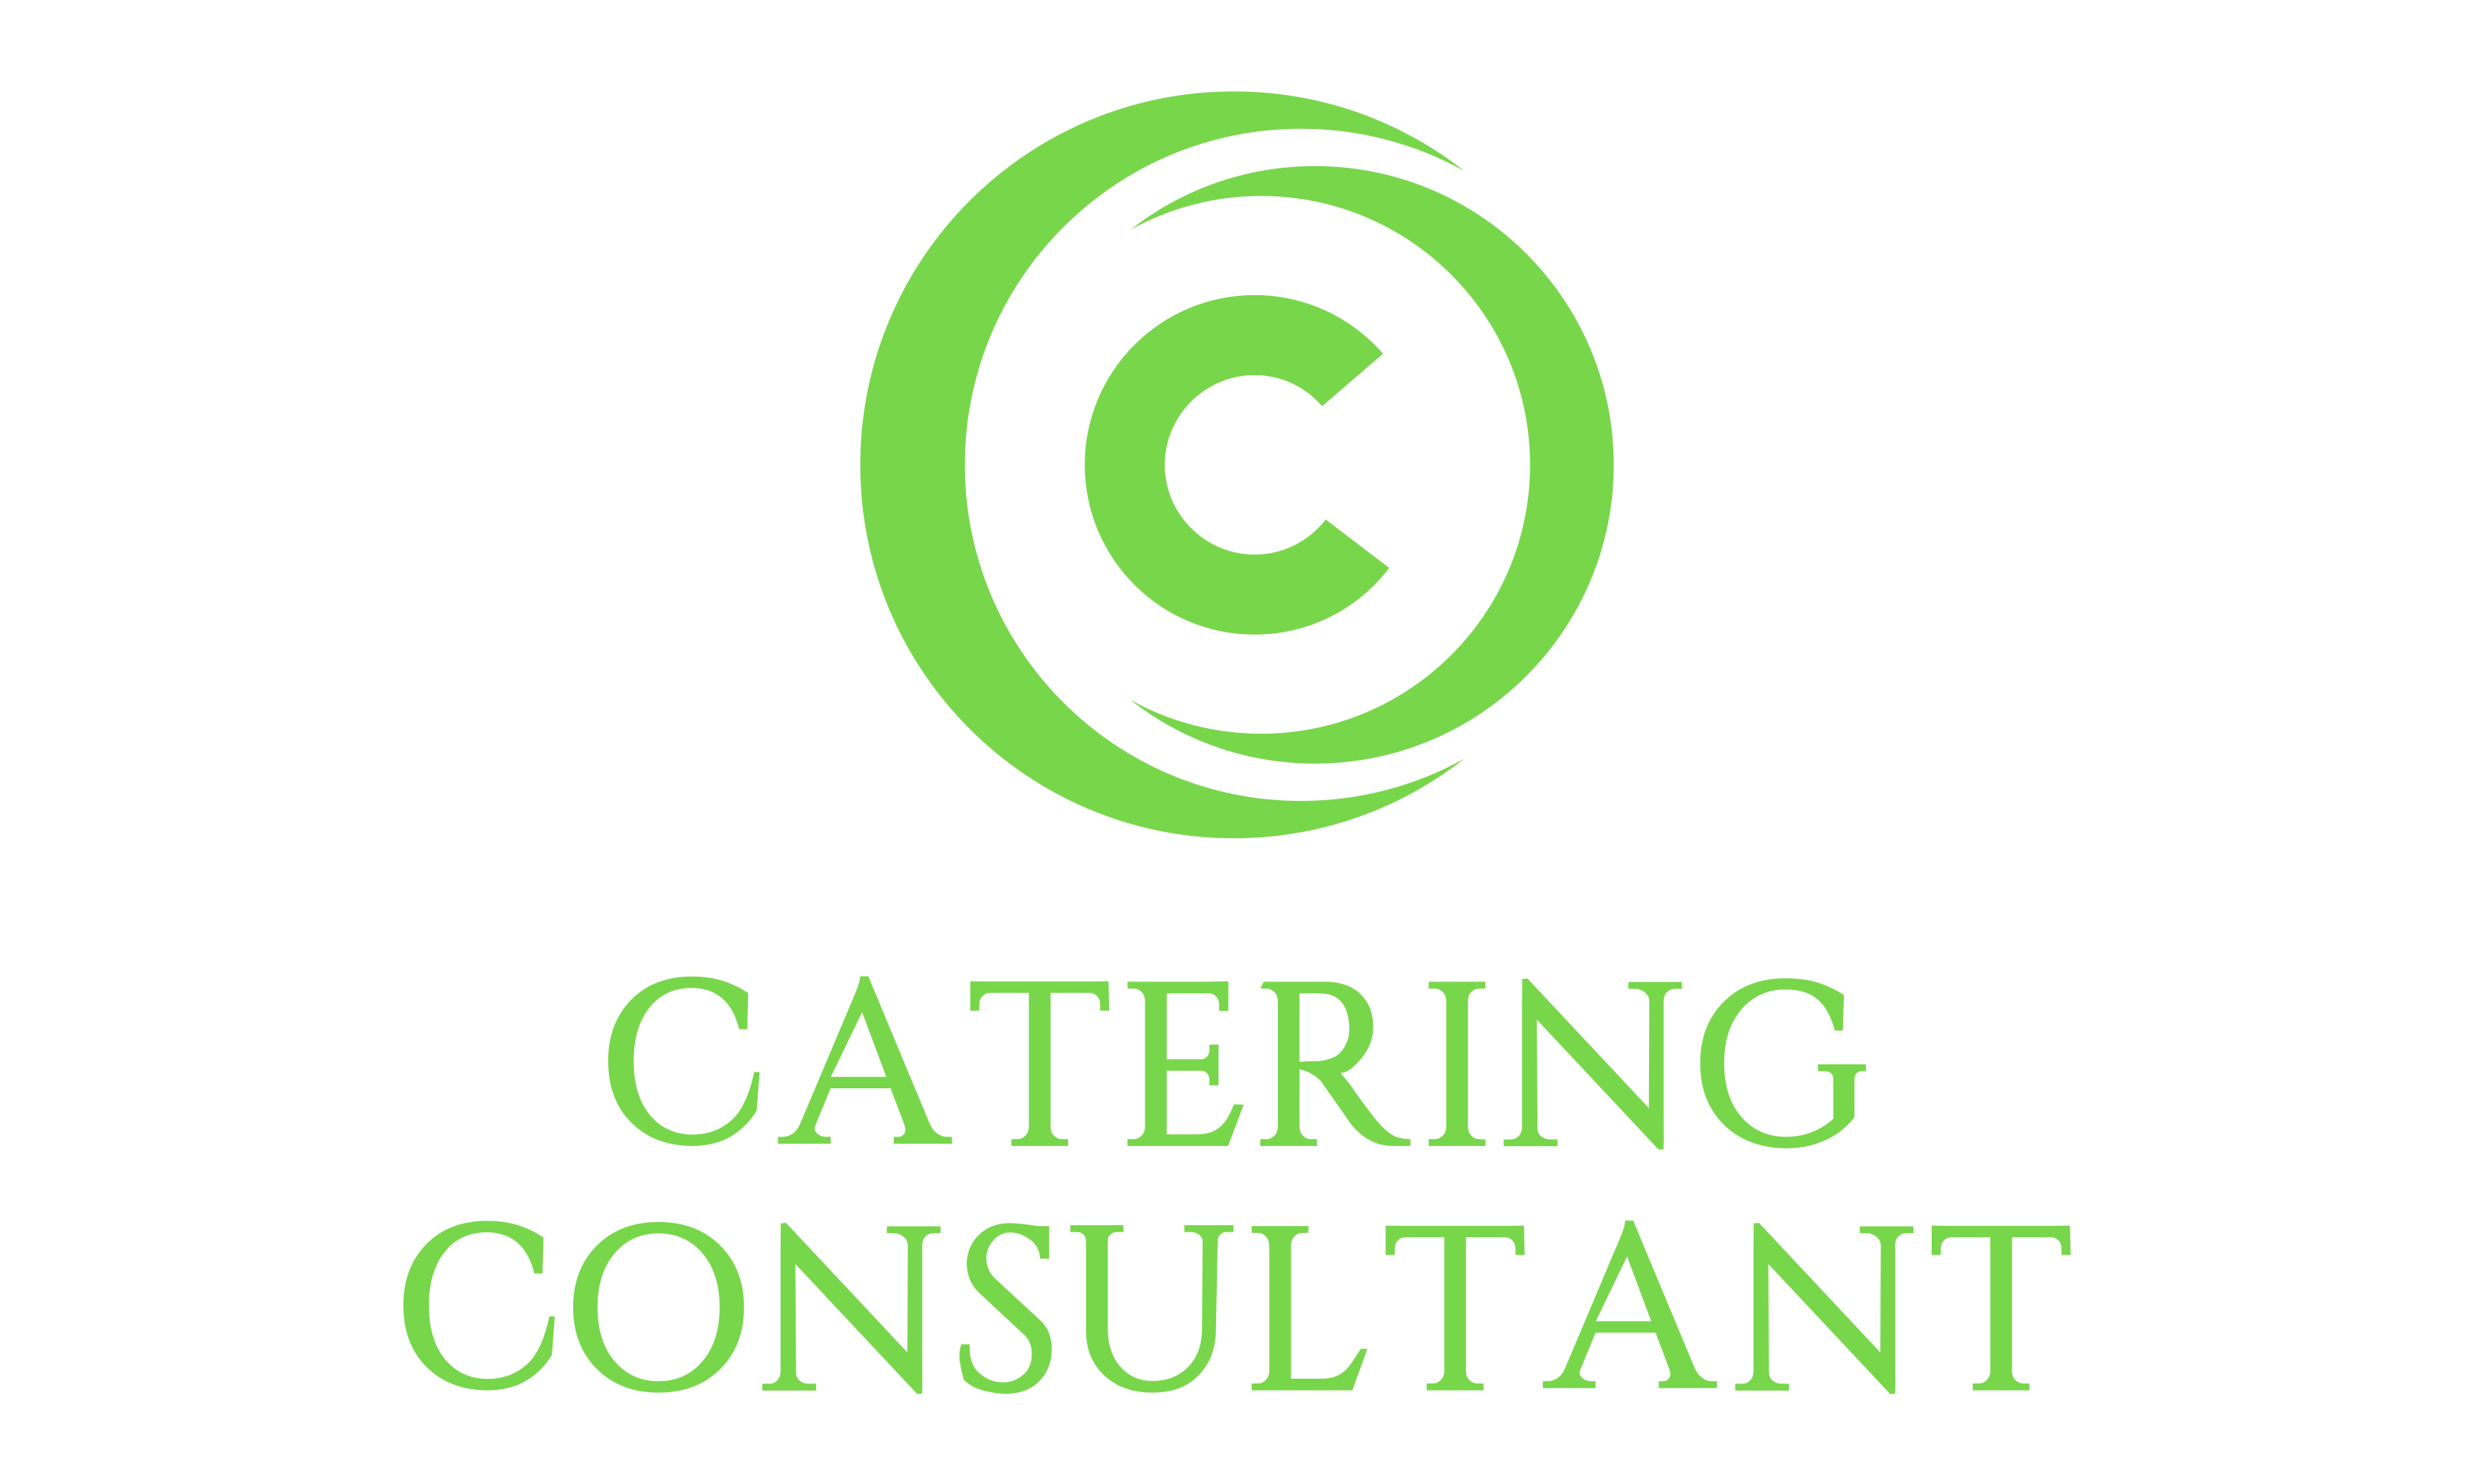 Why would a client use a catering consultant? - Catering Consultants